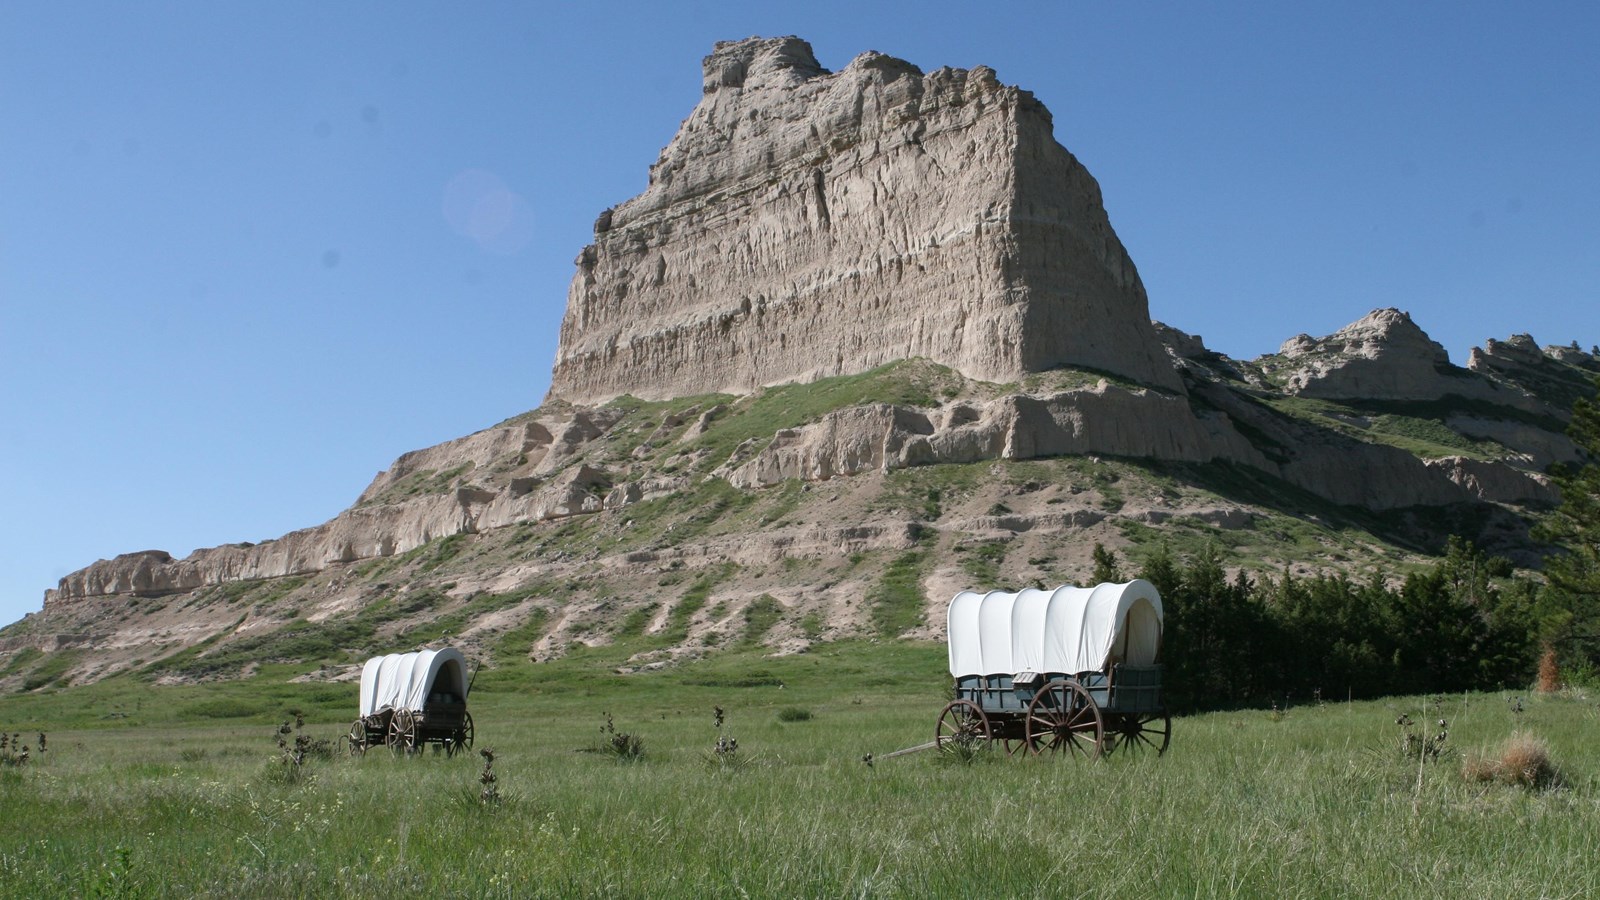 Two covered wagons sit in a grassy field in front of a large rock outcropping.